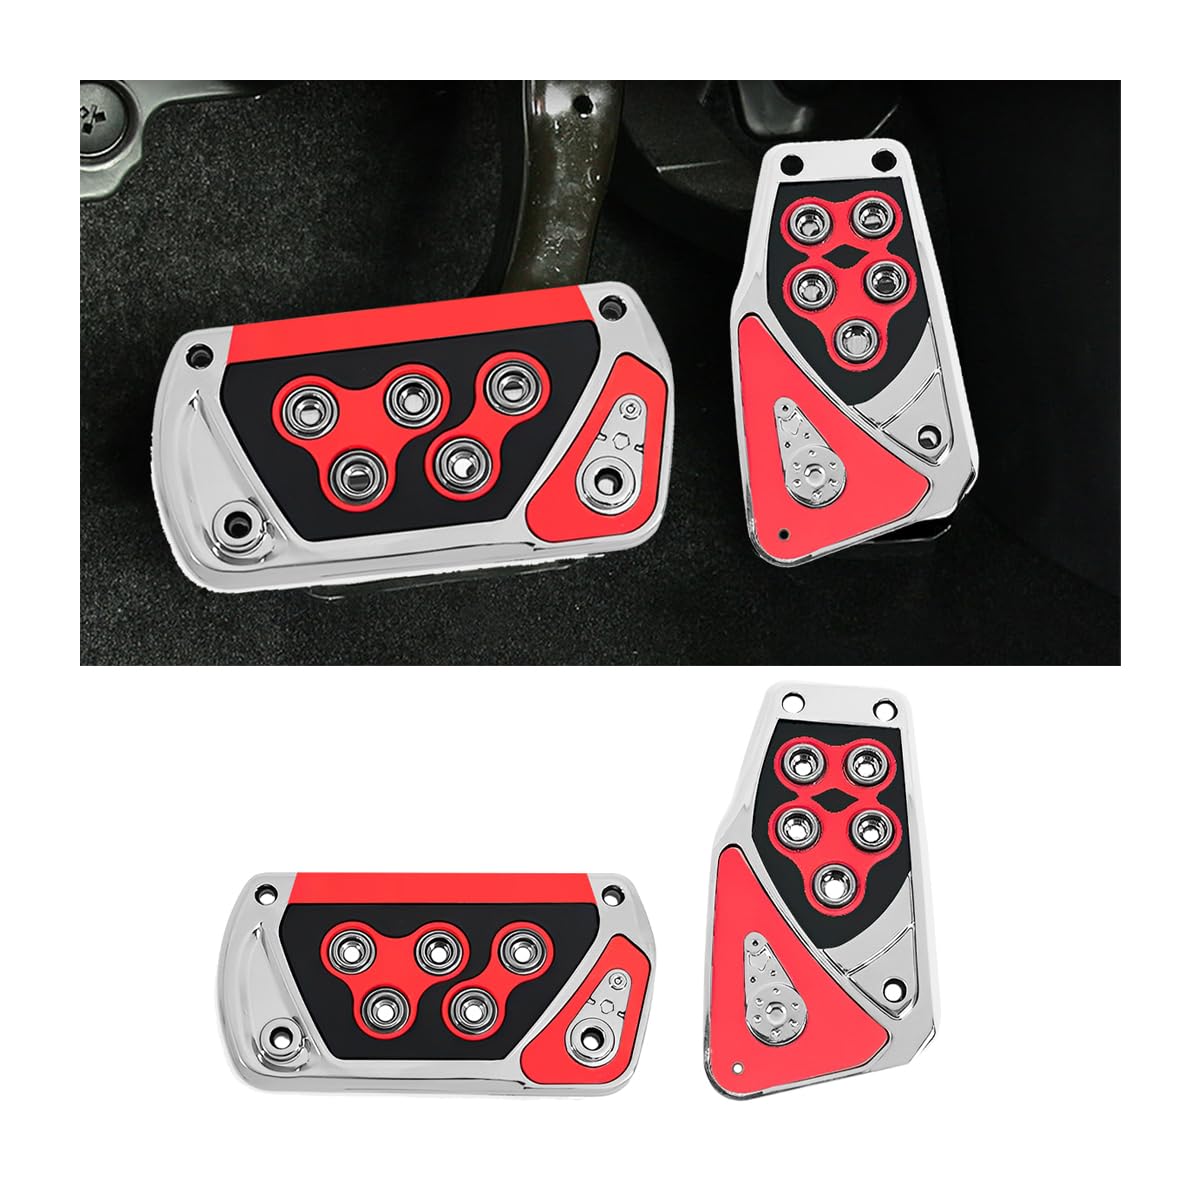 CGEAMDY 2 PCS Auto Pedal Pad Abdeckung, Anti-Rutsch-Automatik-Getriebebremse Gaspedal, Universelle Pedalauflageabdeckung Auto Gaspedal Bremsauflage Pedal(Rot) von CGEAMDY